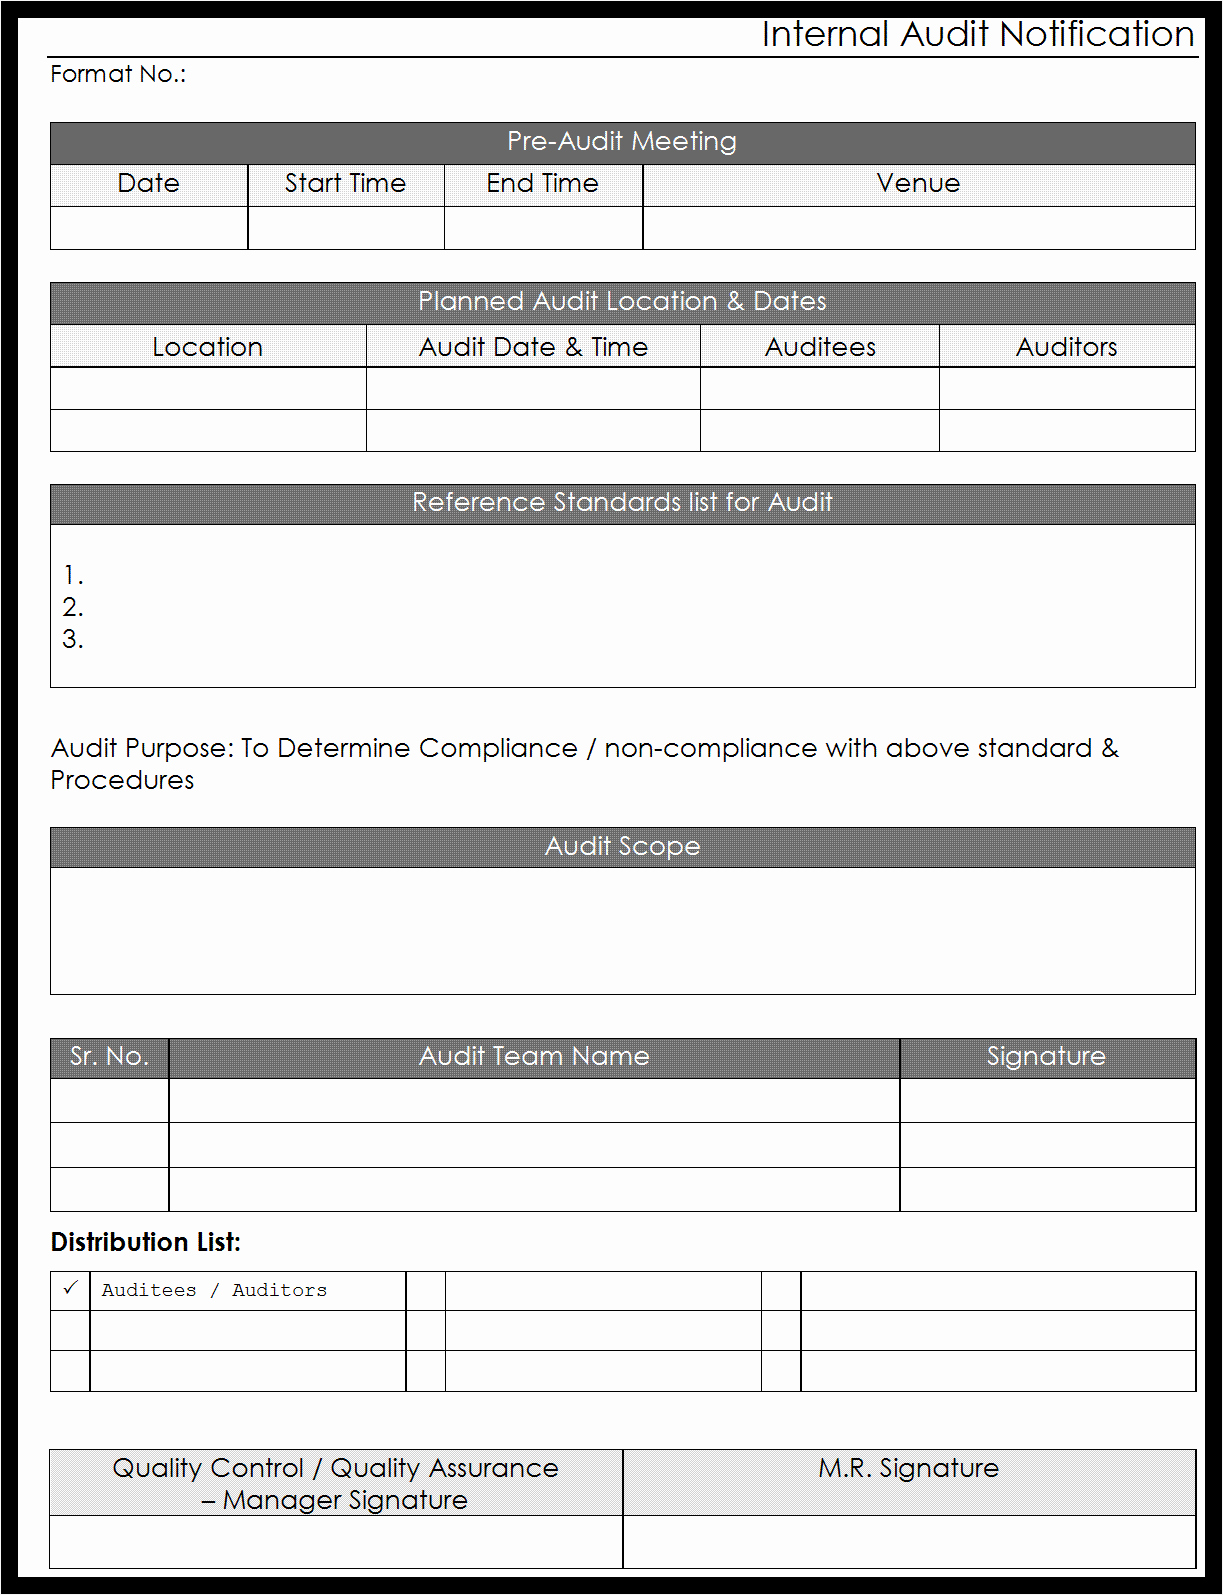 Internal Audit forms Template New Audit form Template Example Mughals